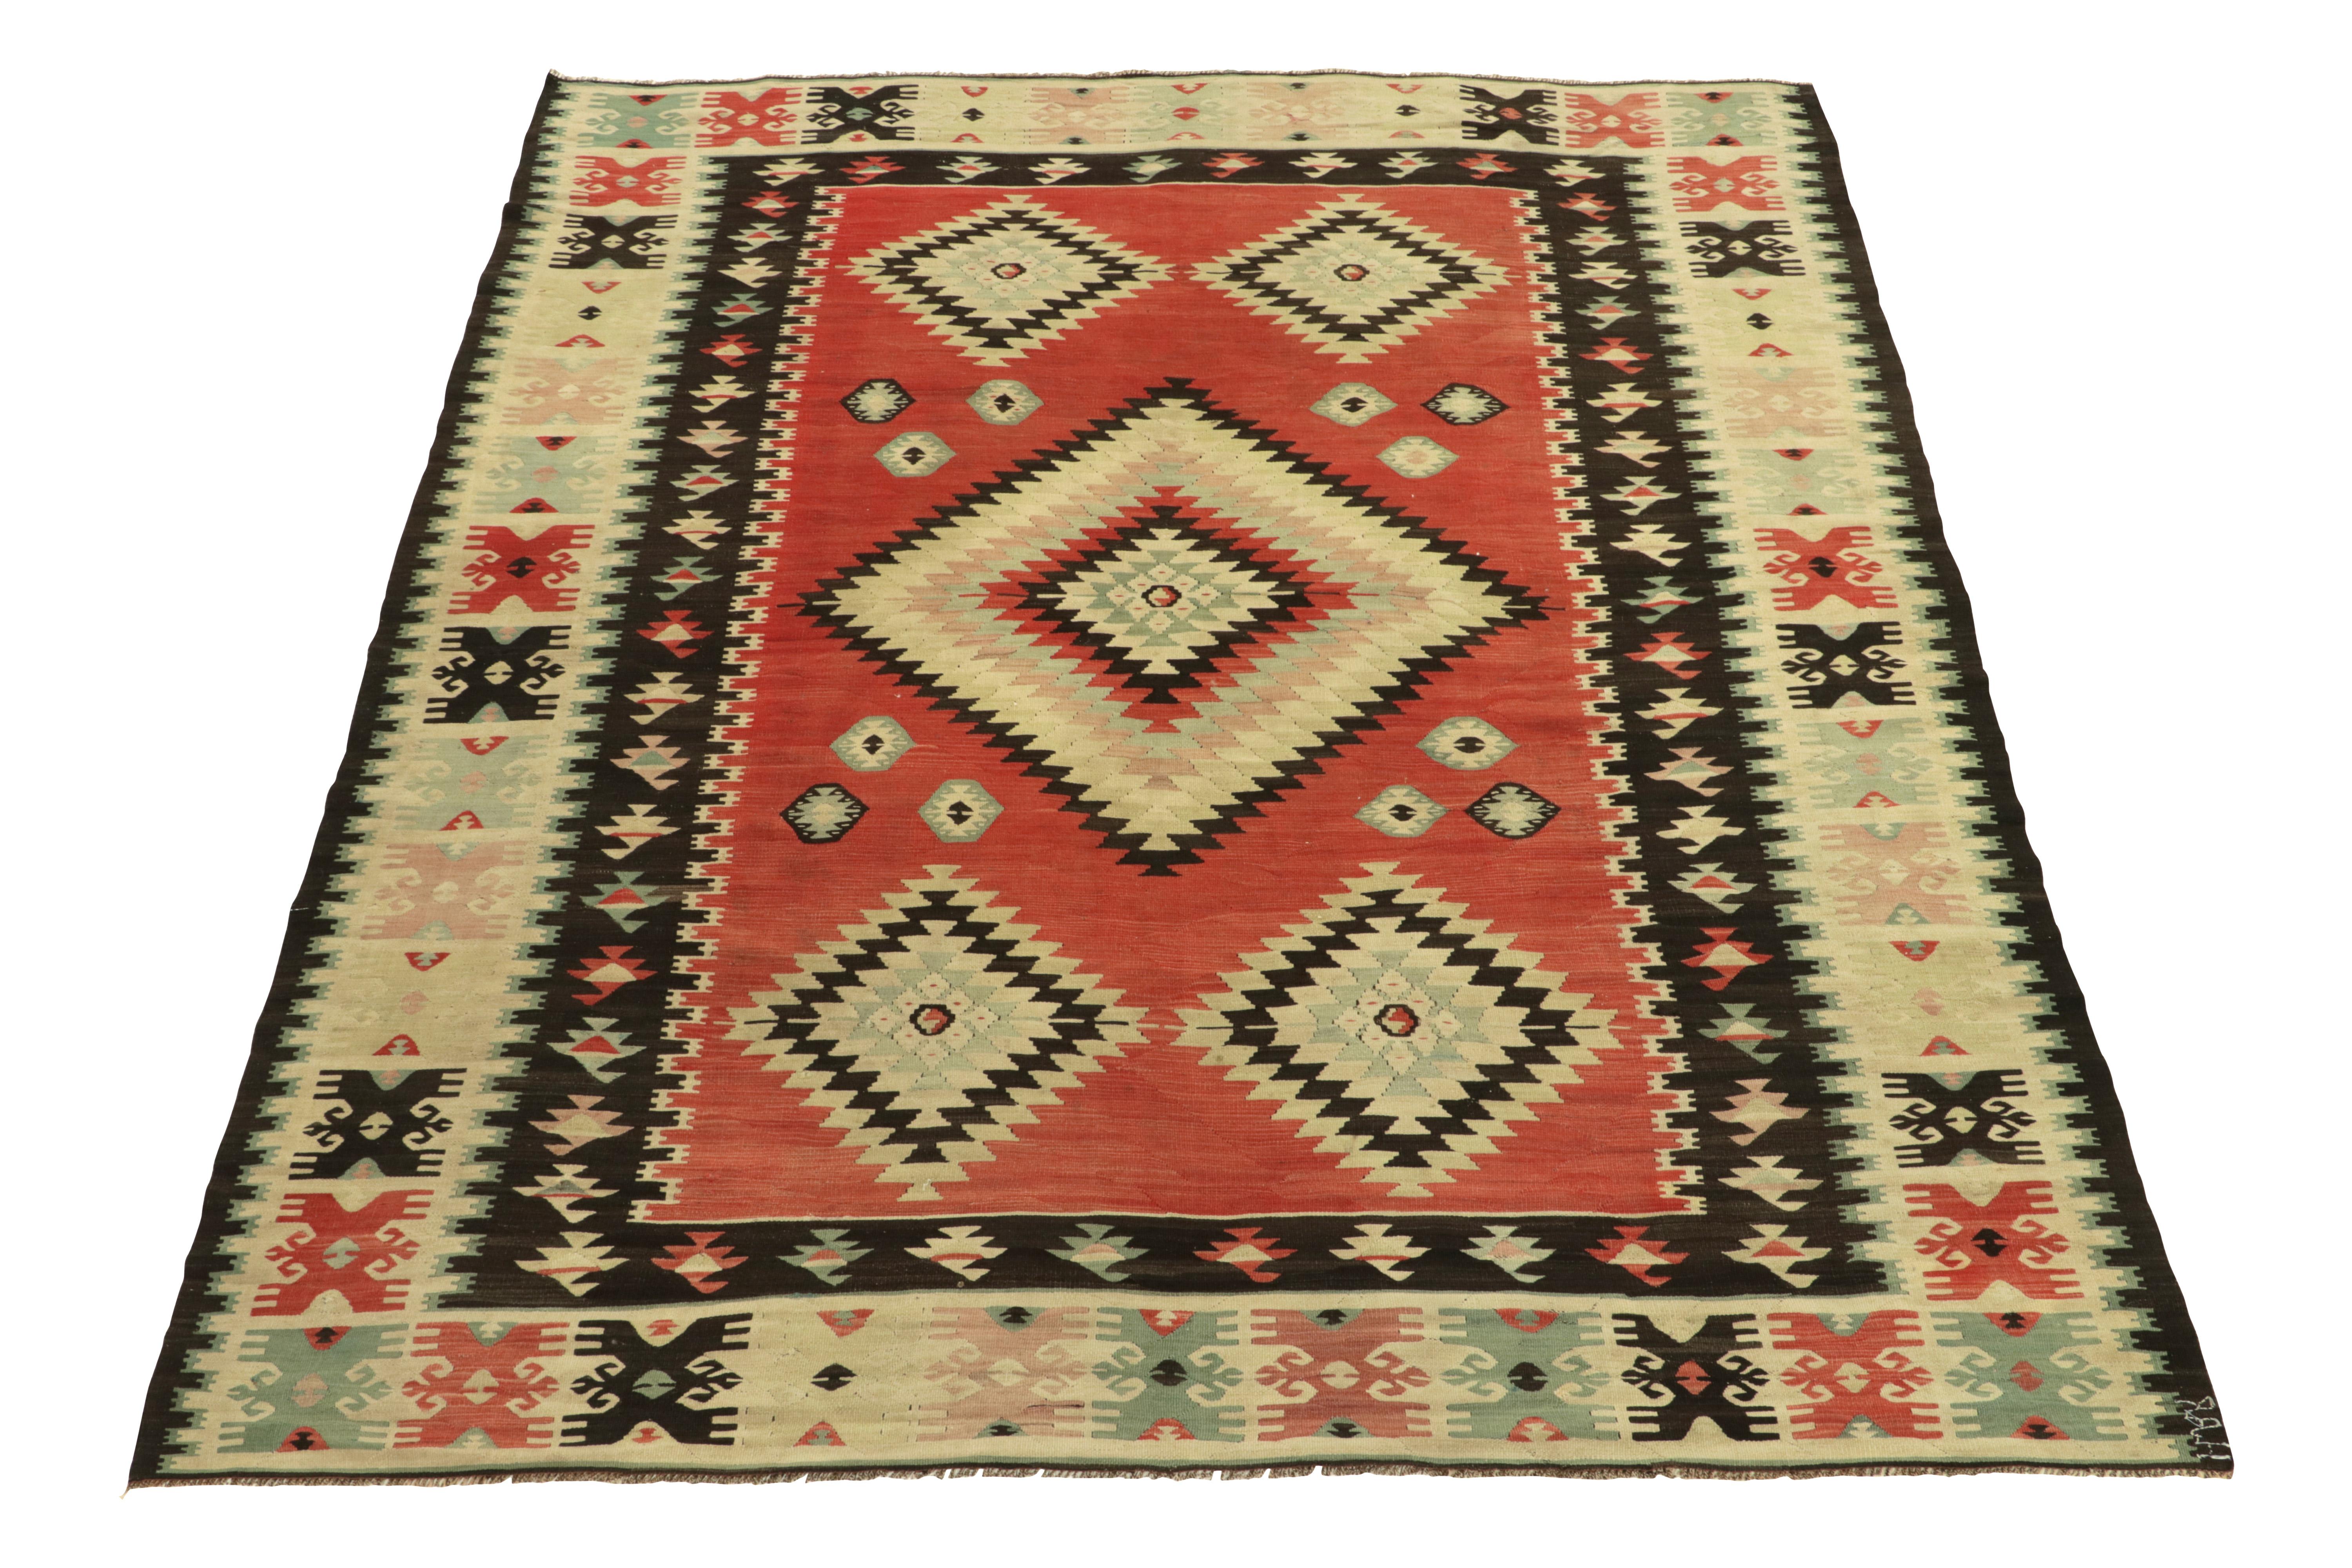 Handwoven in wool, this 8x9 vintage tribal kilim rug remarks a prestigious addition in our flatweave collection. This rare mid-century flatweave from Turkey features a tribal pattern & abrashed striations of black beneath the prevalent pink, blue